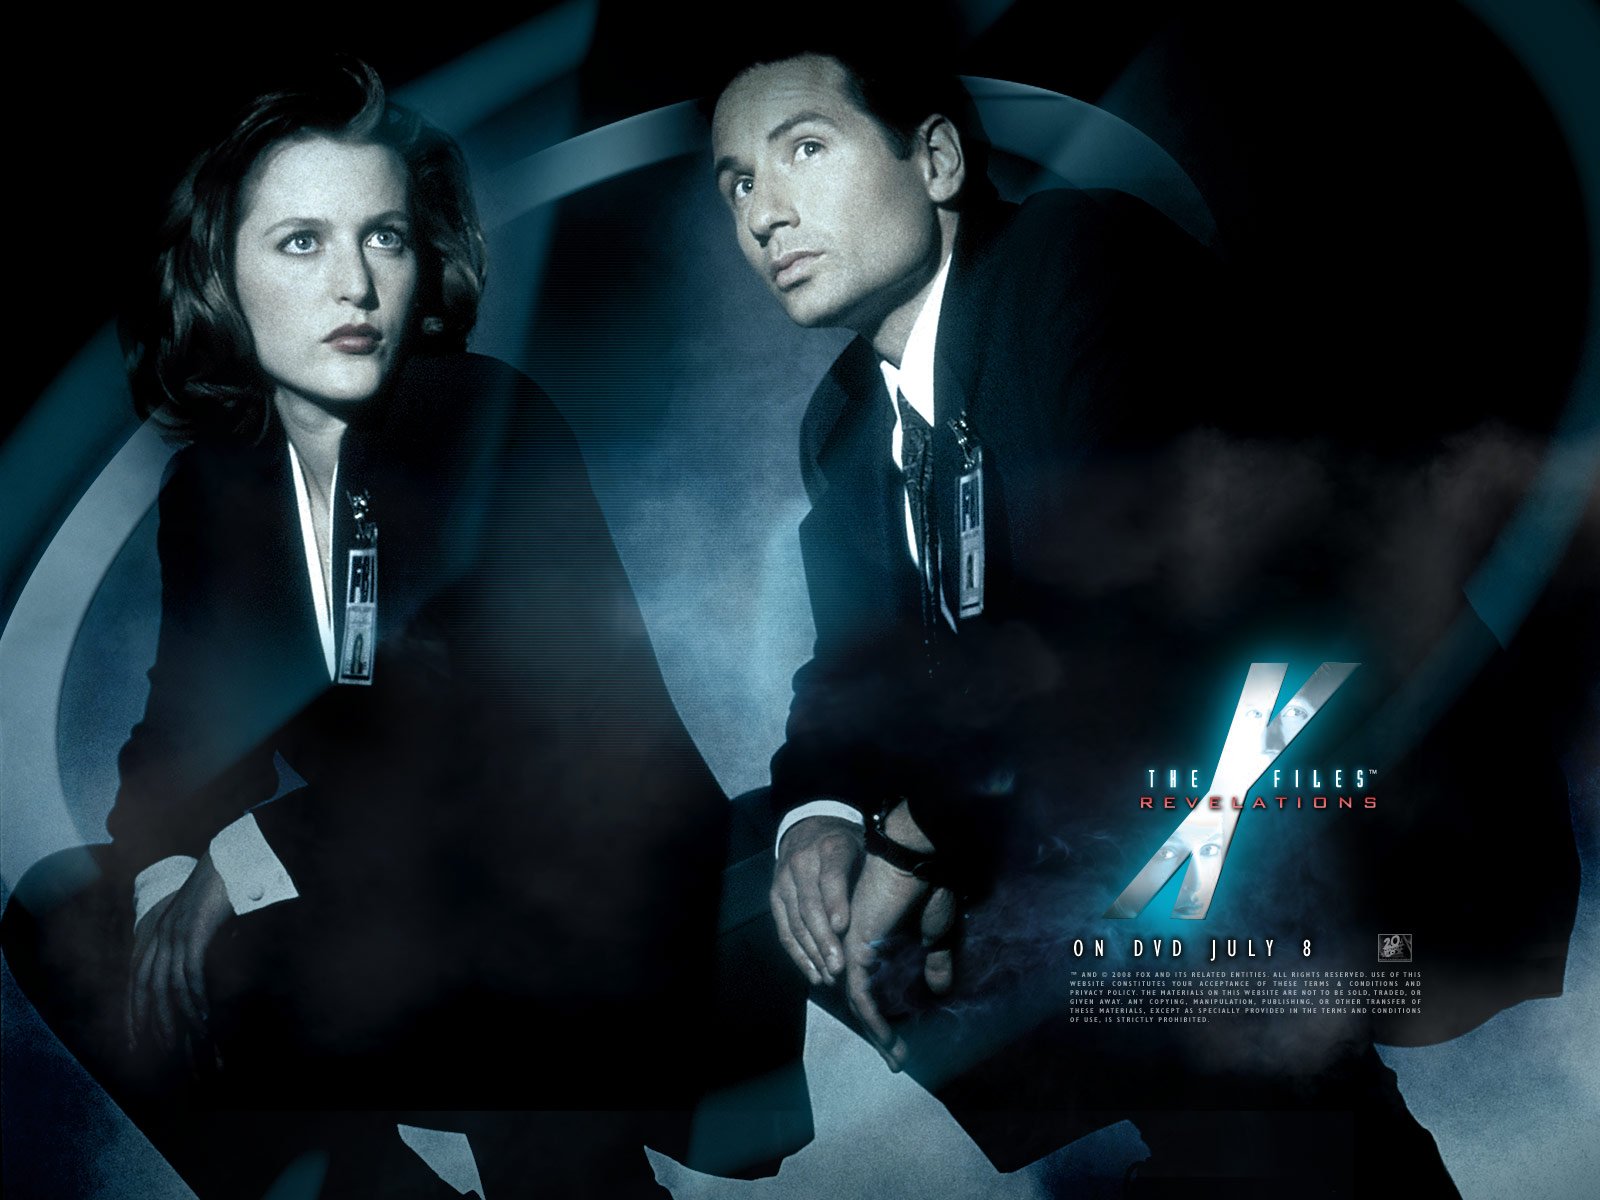 the, X files, Sci fi, Mystery, Drama, Television, Files, Series, Poster Wallpaper